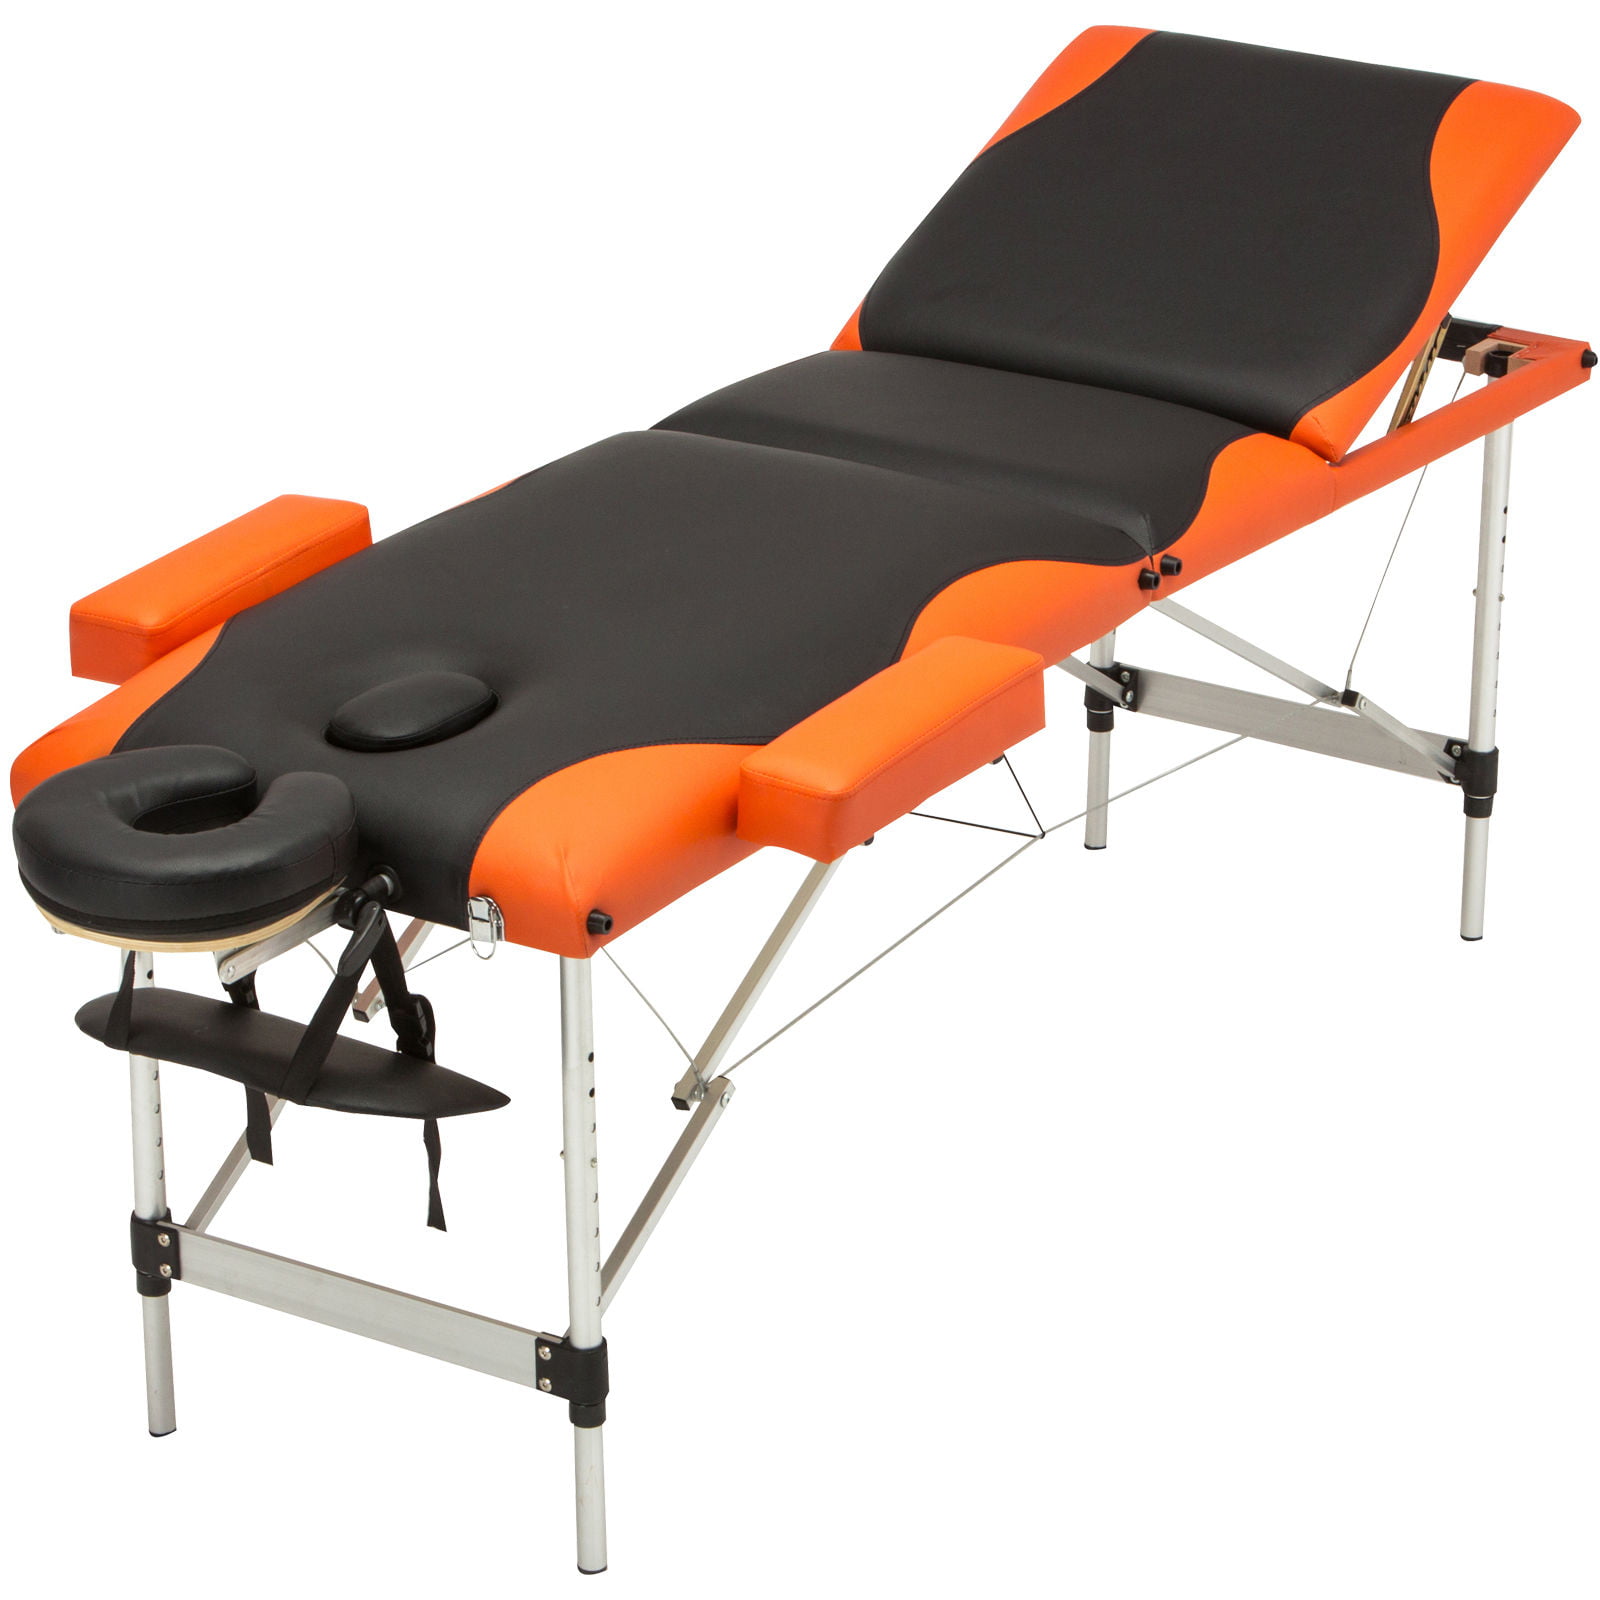 84 L Folding Massage Table Aluminum Frame 3 Fold Portable Massage Bed With Carrying Bag 3 Fold